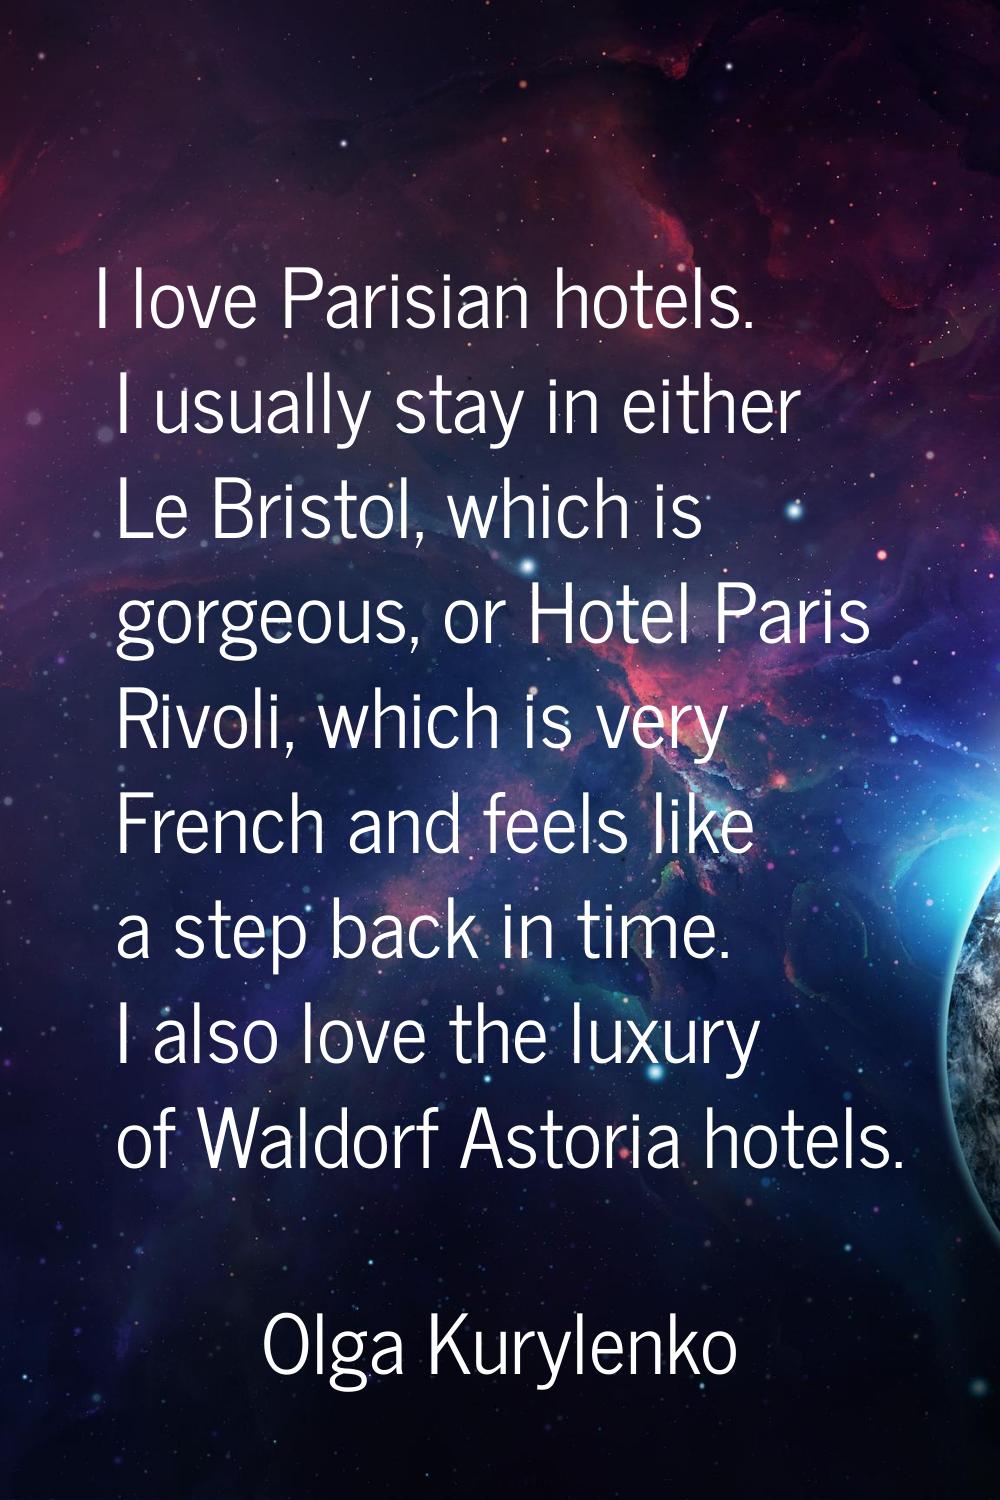 I love Parisian hotels. I usually stay in either Le Bristol, which is gorgeous, or Hotel Paris Rivo